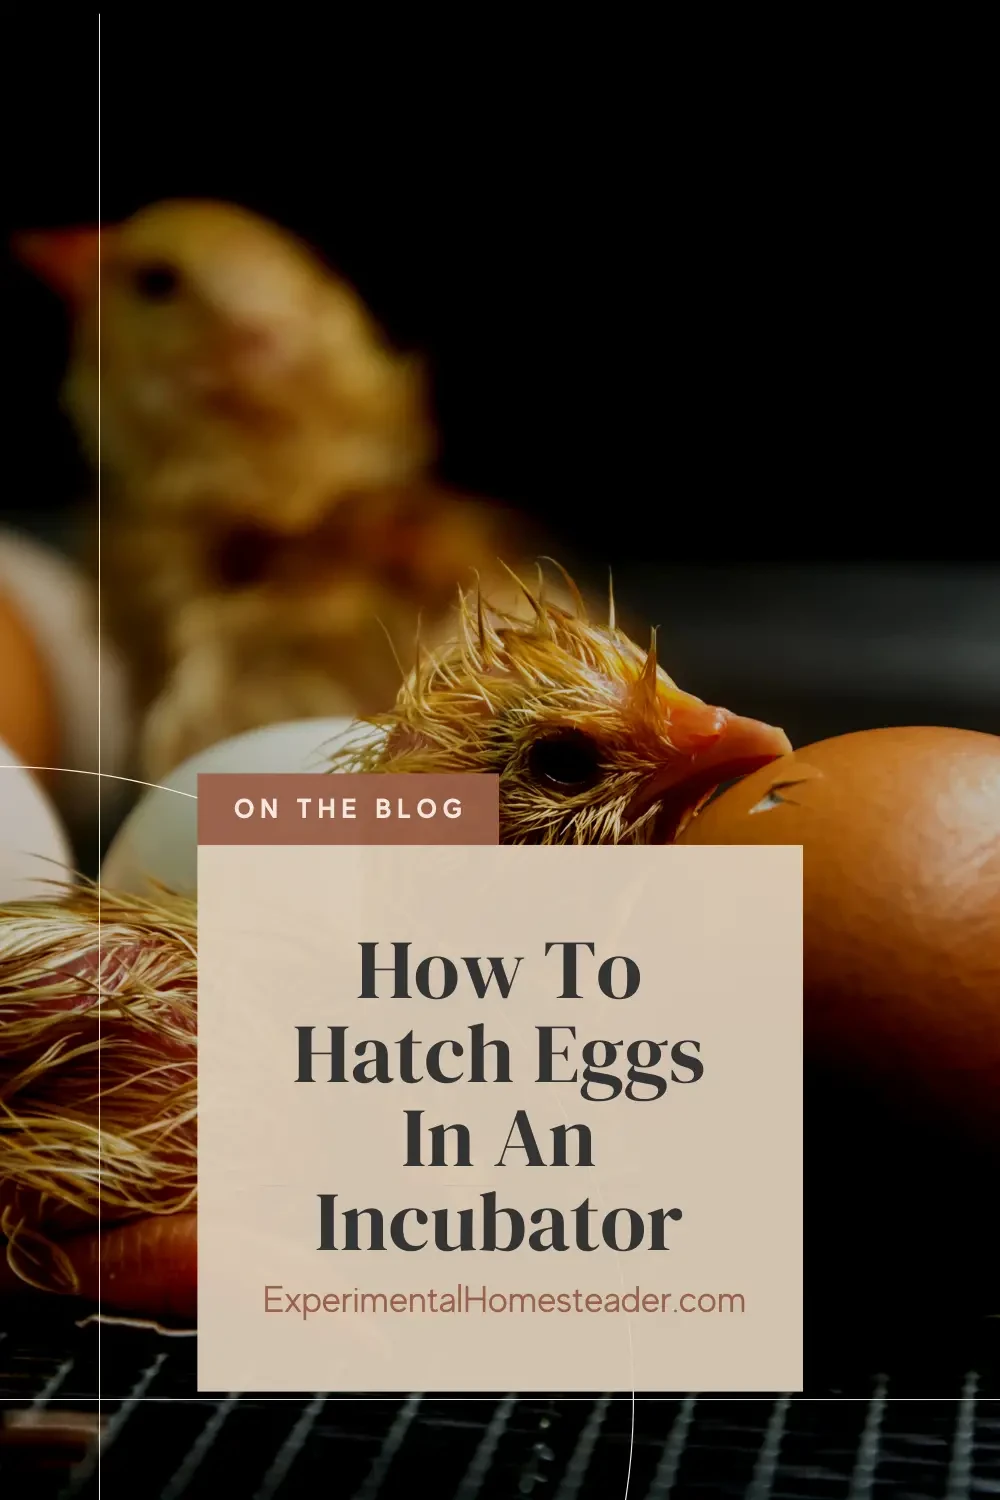 Newly hatched chicks and unhatched eggs in an incubator.